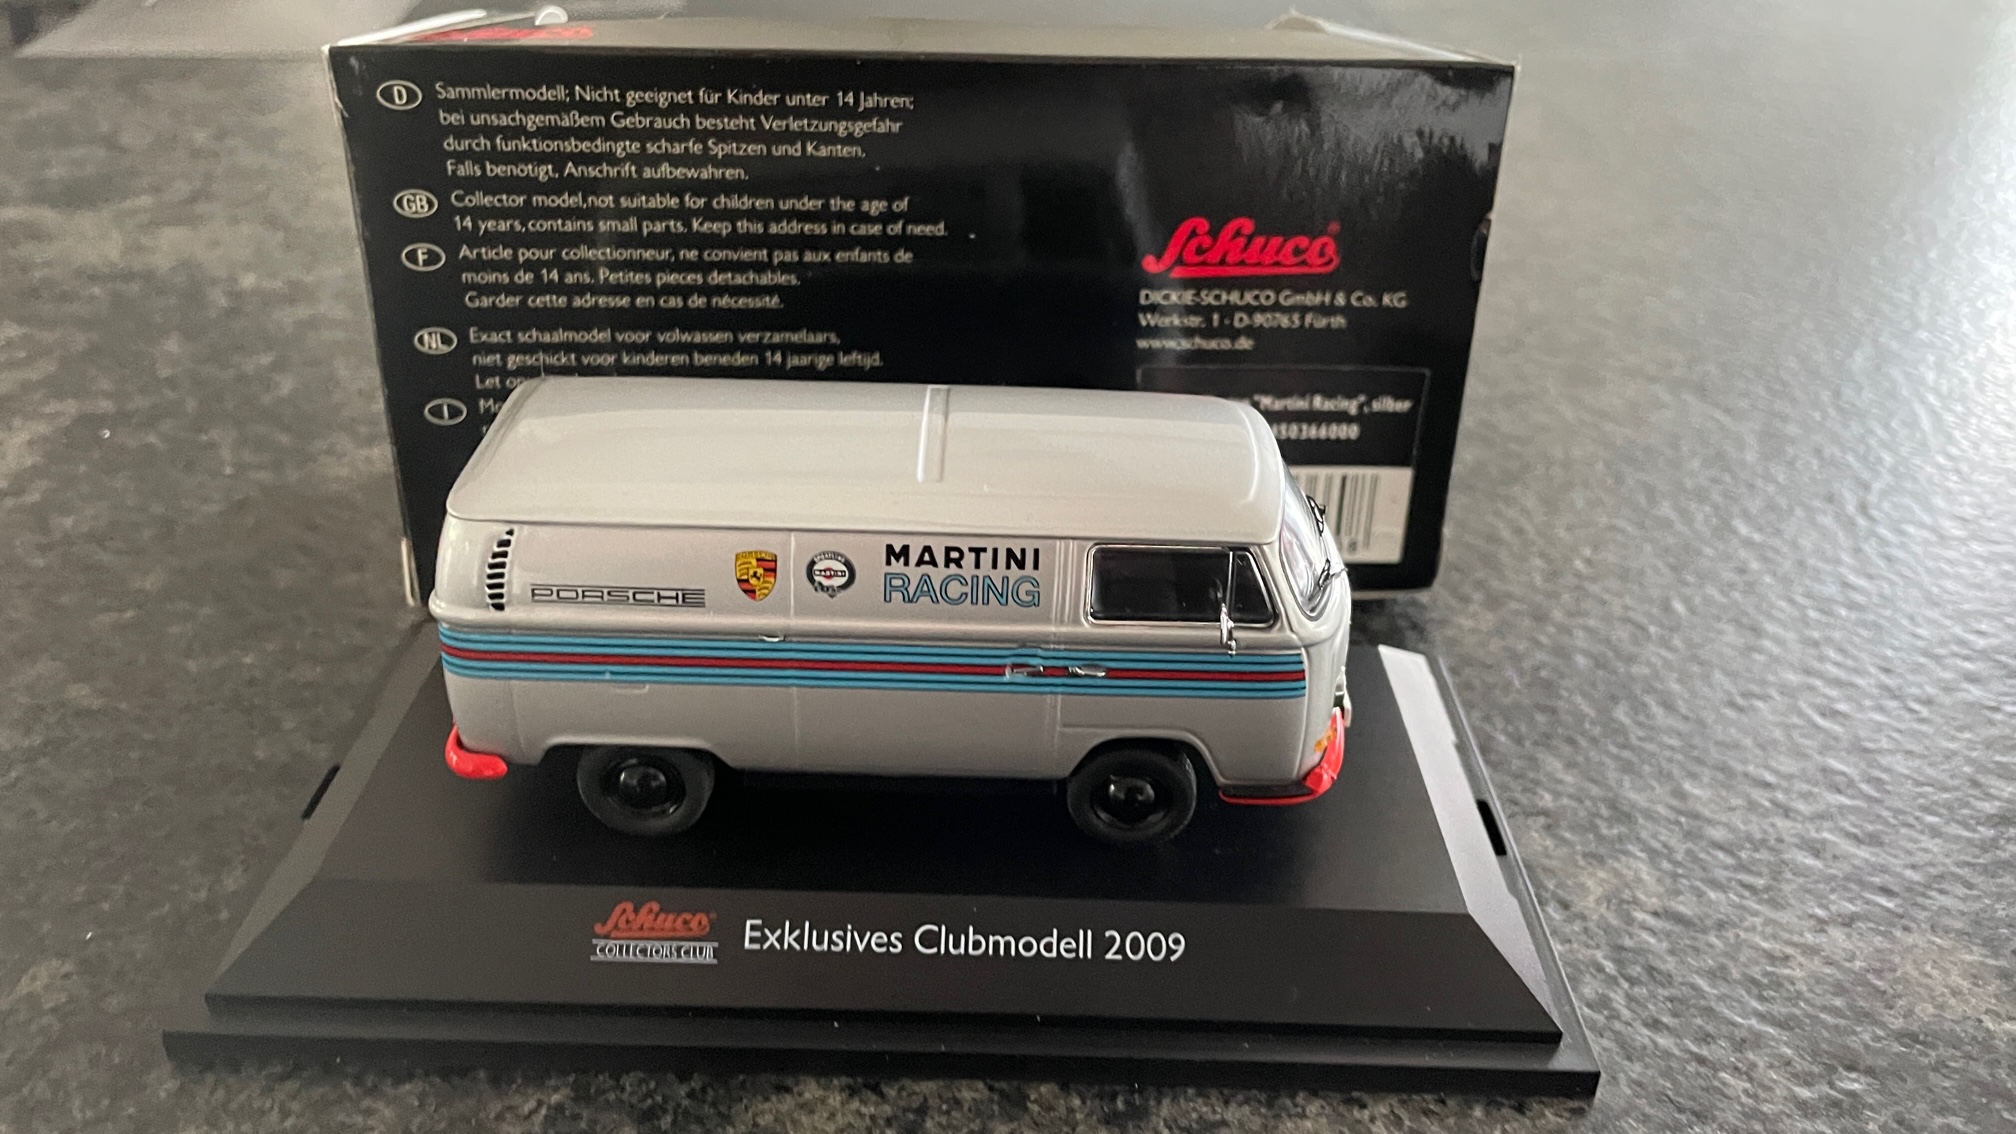 VW T A Martini Racing Clubmodell Historically Passenger Car Delivery Vans Schuco